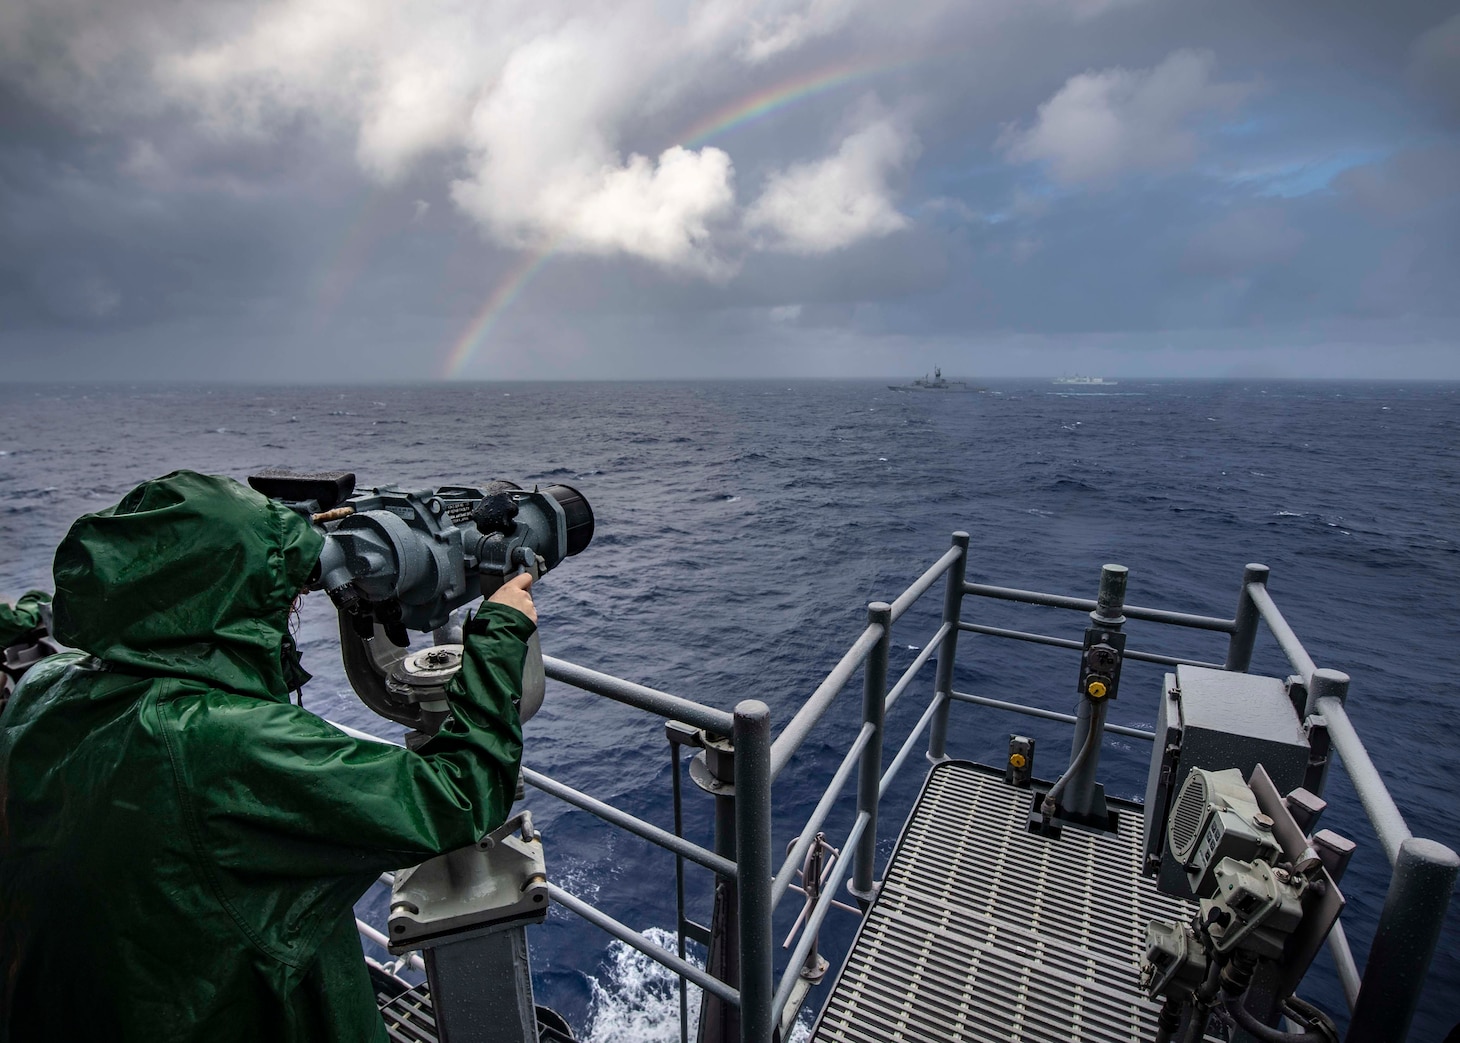 PHILIPPINE SEA (Nov. 21, 2019) Lt. j.g. Katherine Lindman, from Minneapolis, looks through binoculars on the bridge of the Ticonderoga-class guided-missile cruiser USS Chancellorsville (CG 62) during a group maneuvering exercise with ships from the Royal Australian Navy, Royal Canadian Navy, and Republic of Korea Navy as part of Pacific Vanguard 2019. Chancellorsville is forward-deployed to the U.S. 7th Fleet area of operations in support of security and stability in the Indo-Pacific region.